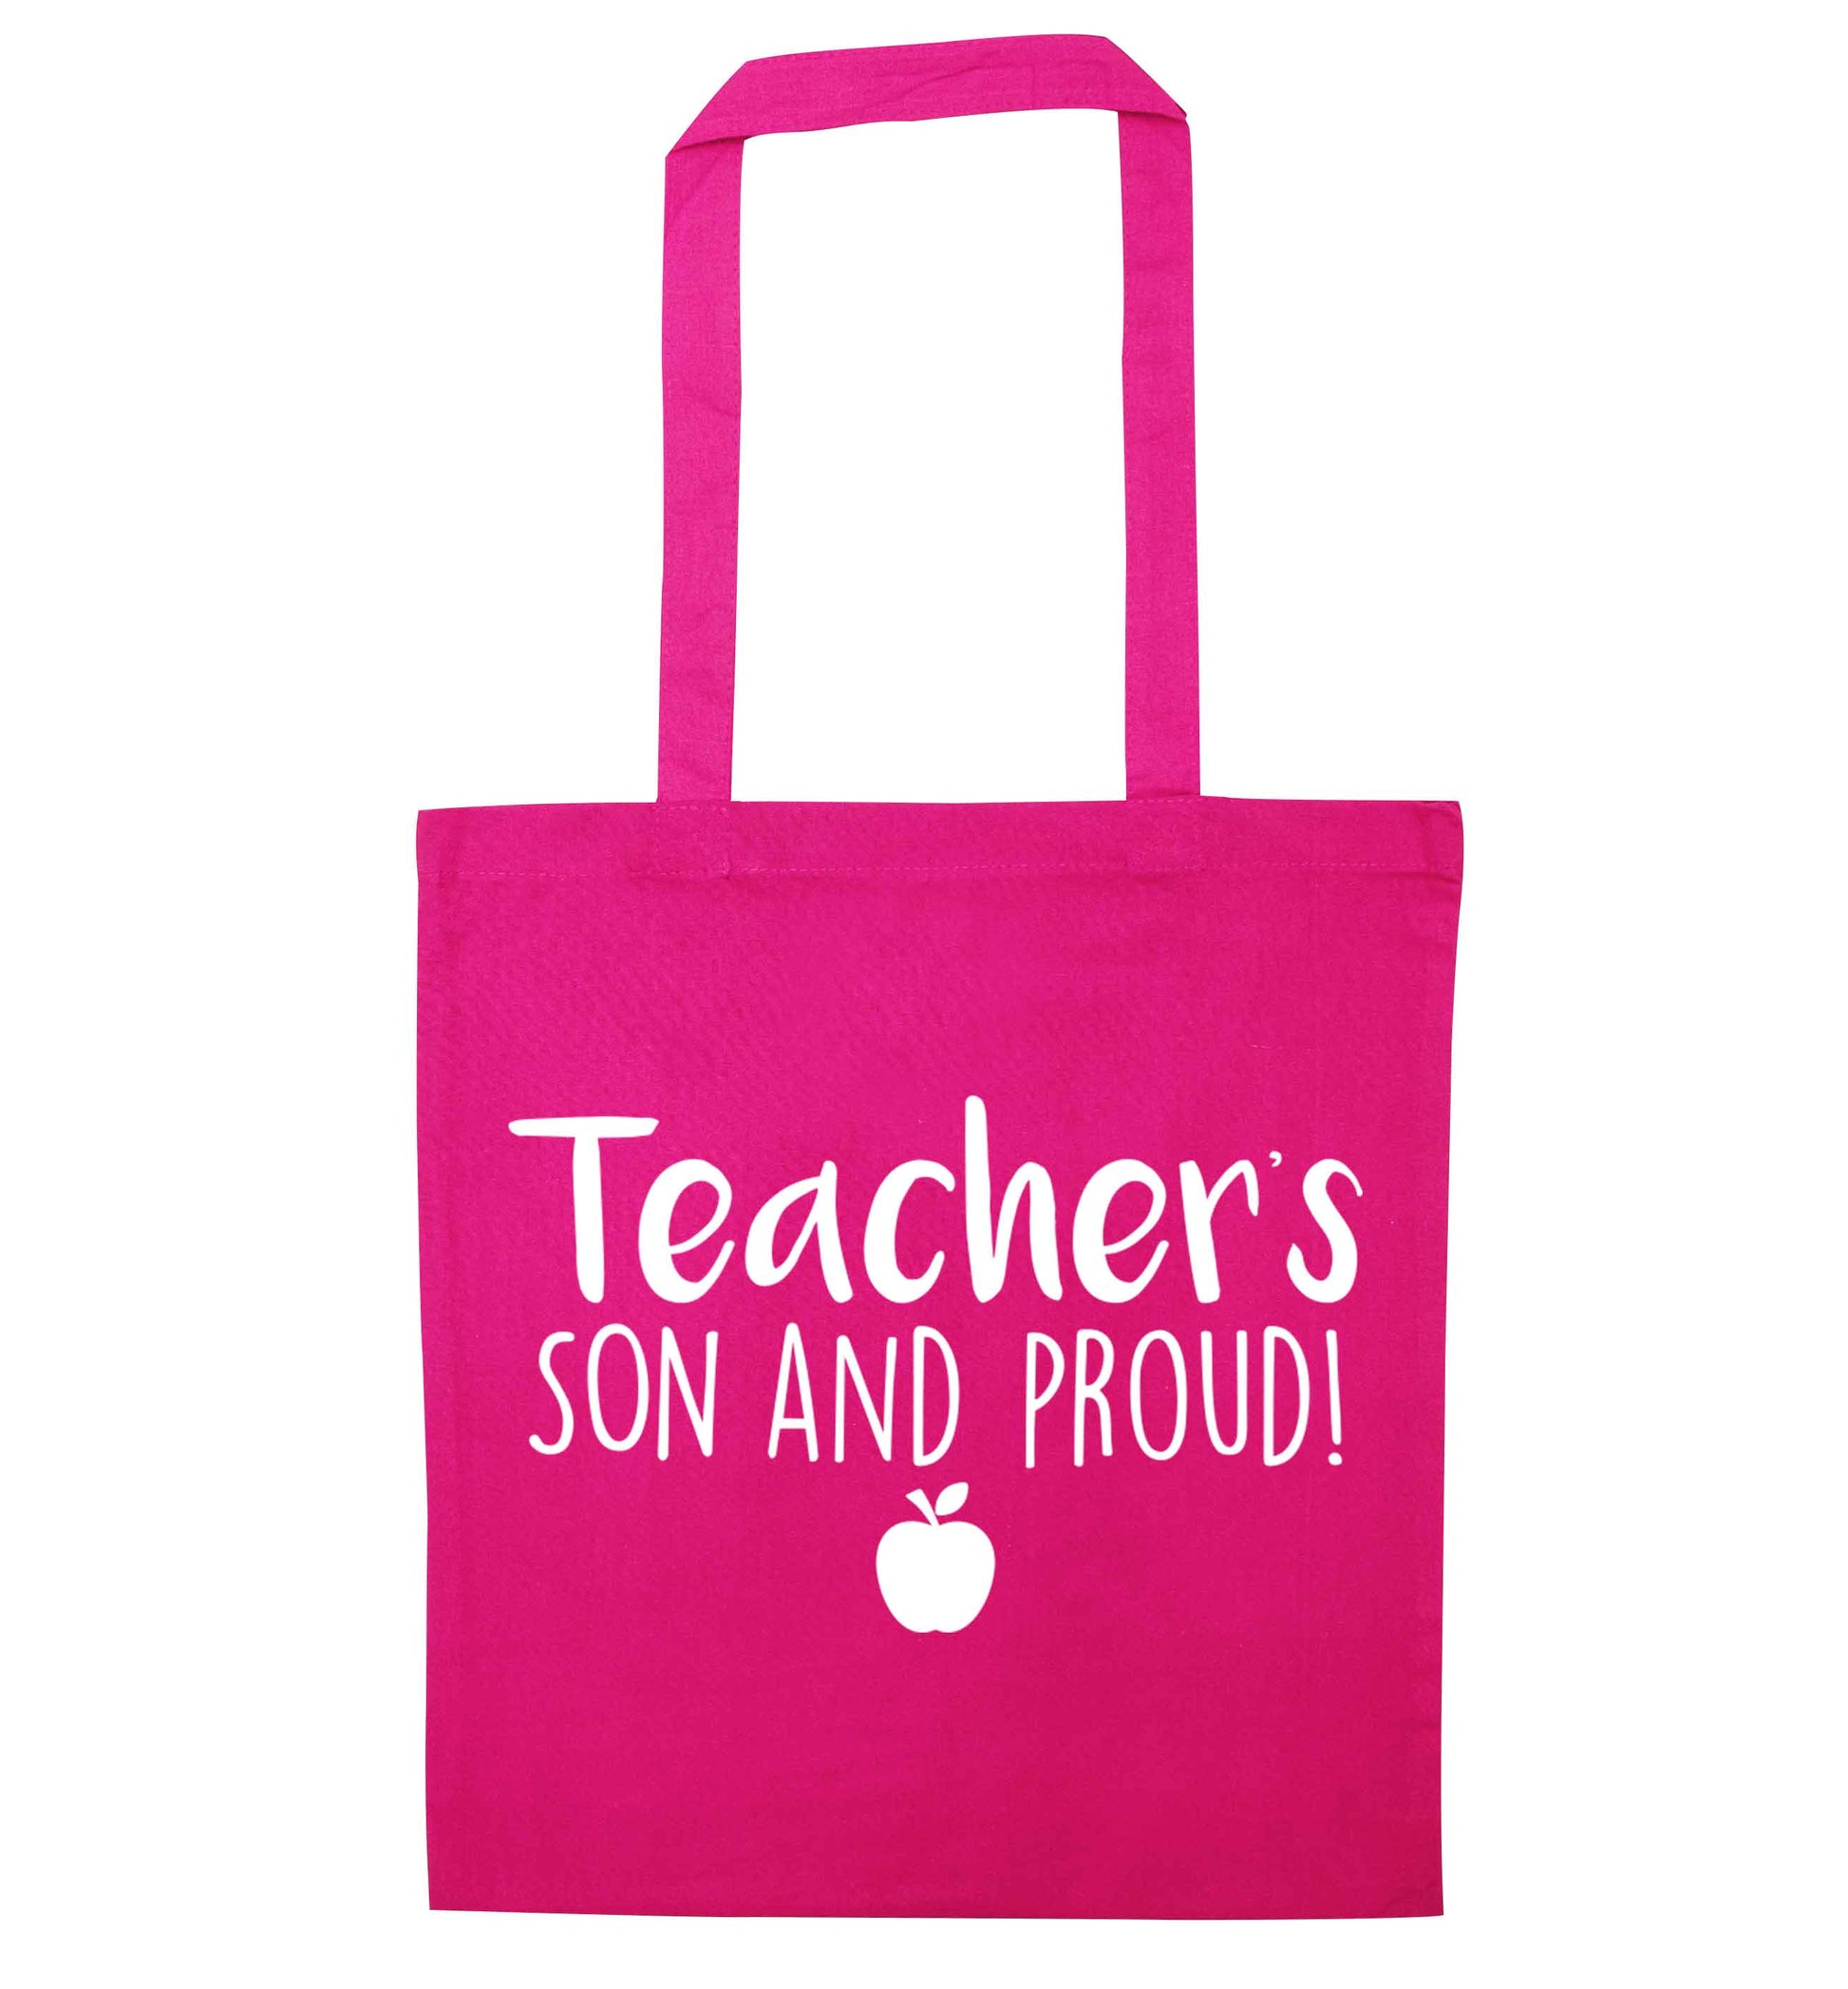 Teachers son and proud pink tote bag